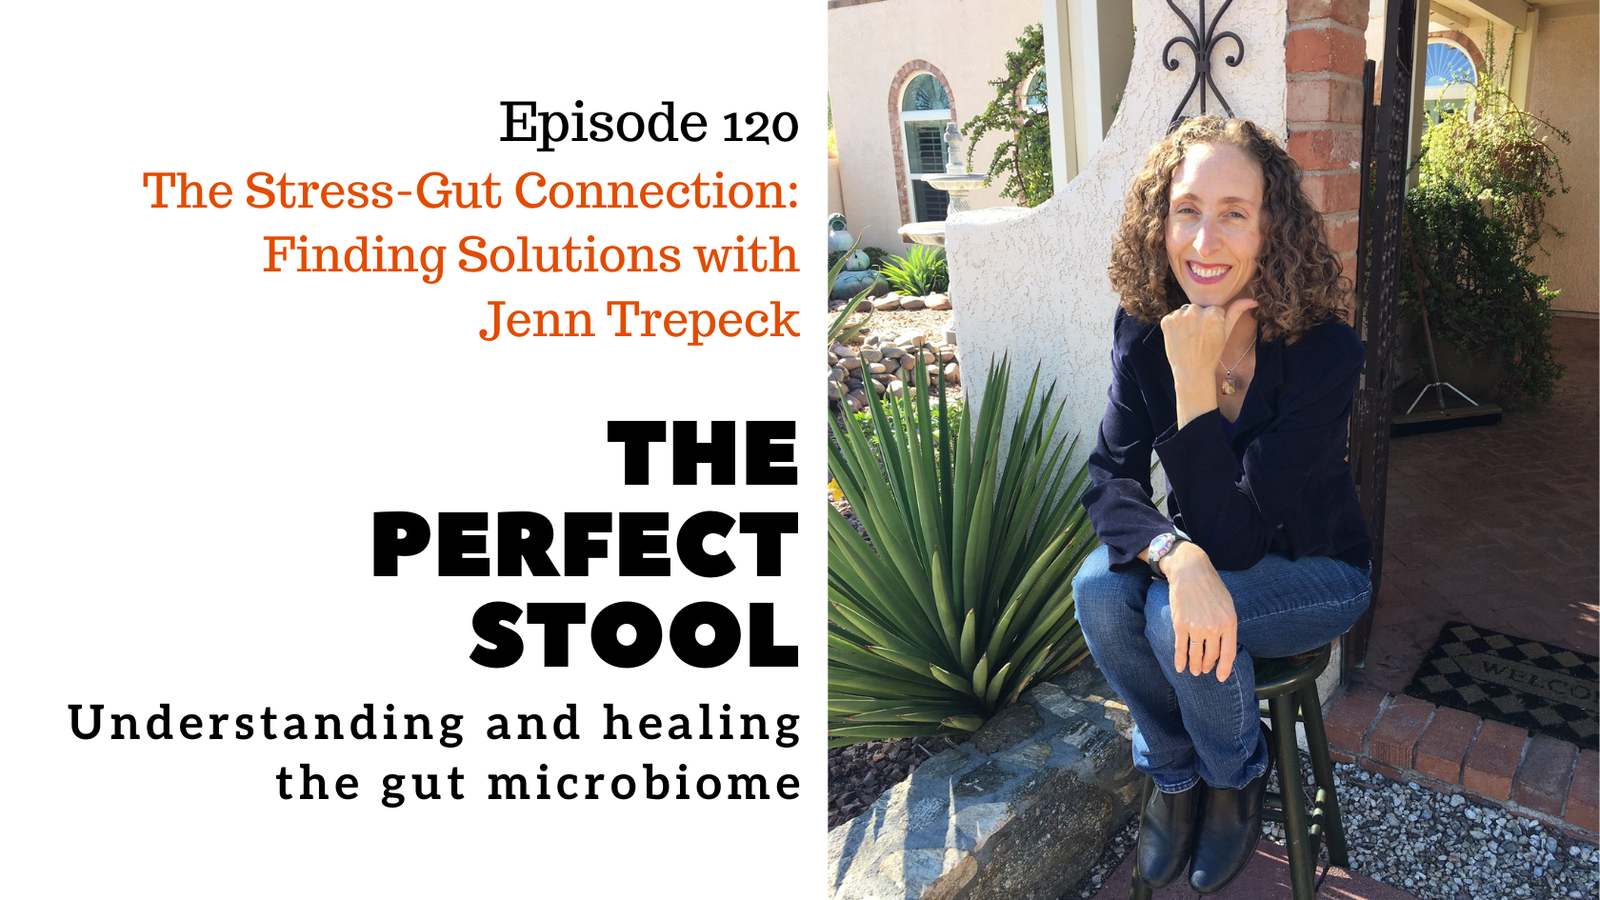 The Stress-Gut Connection: Finding Solutions with Jenn Trepeck